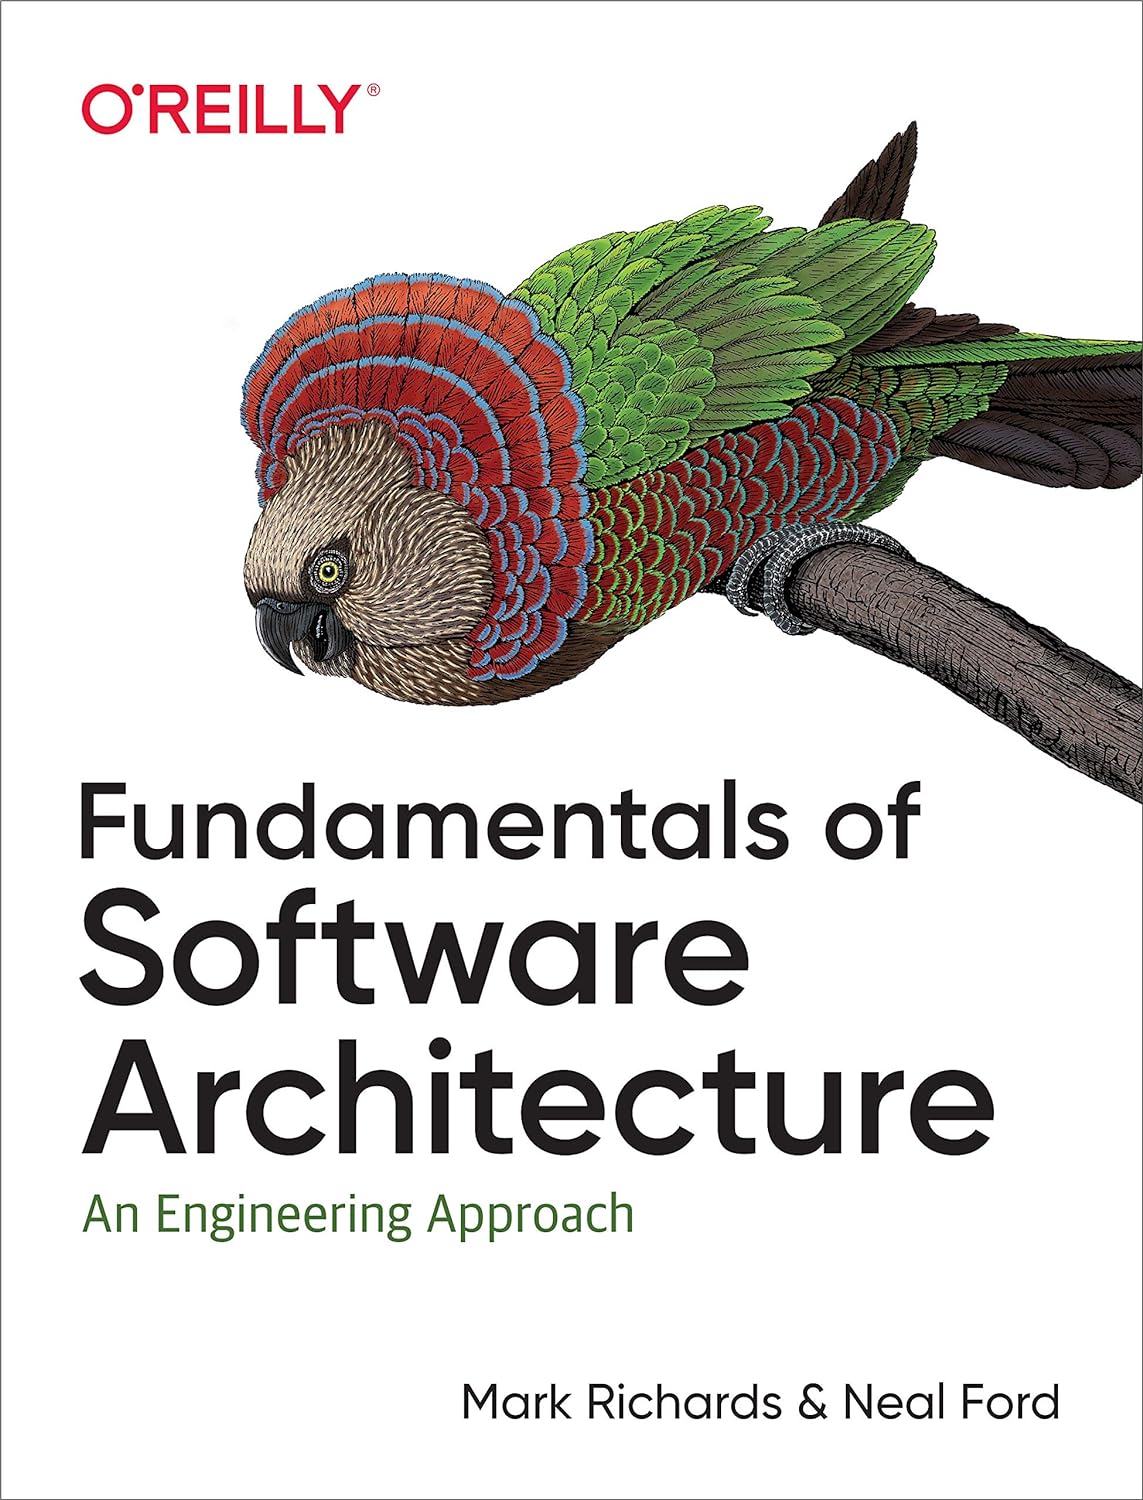 Fundamentals of Software Architecture by Mark Richards